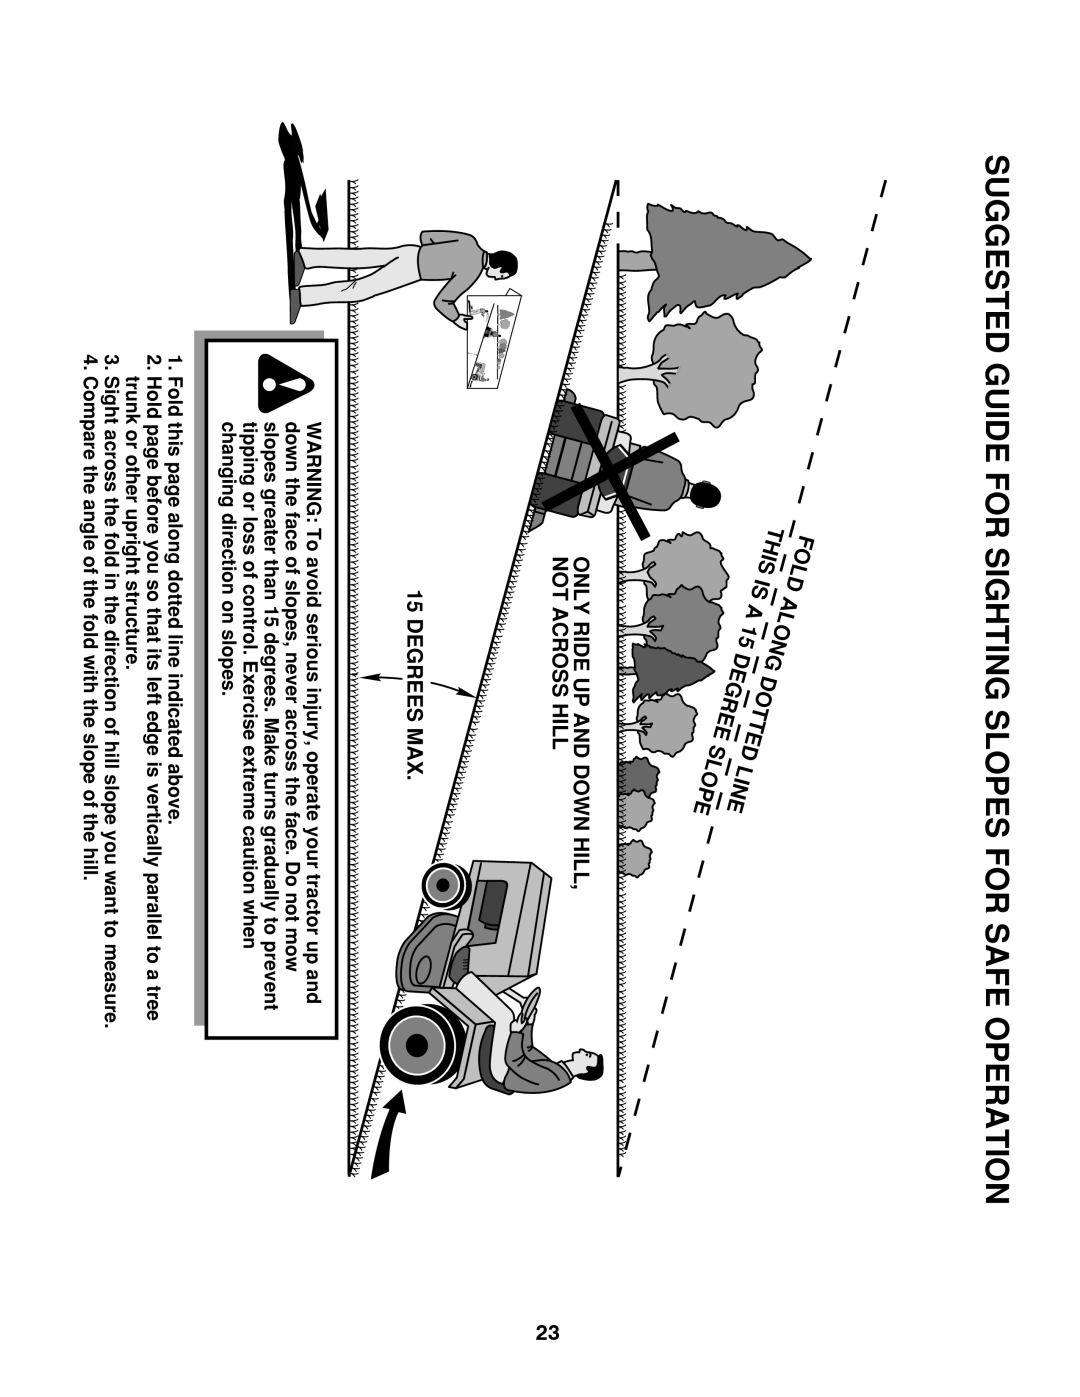 Poulan 424368 manual Suggested Guide For Sighting Slopes For Safe Operation, Fold, Along, This, Dotted, Line, Degree 